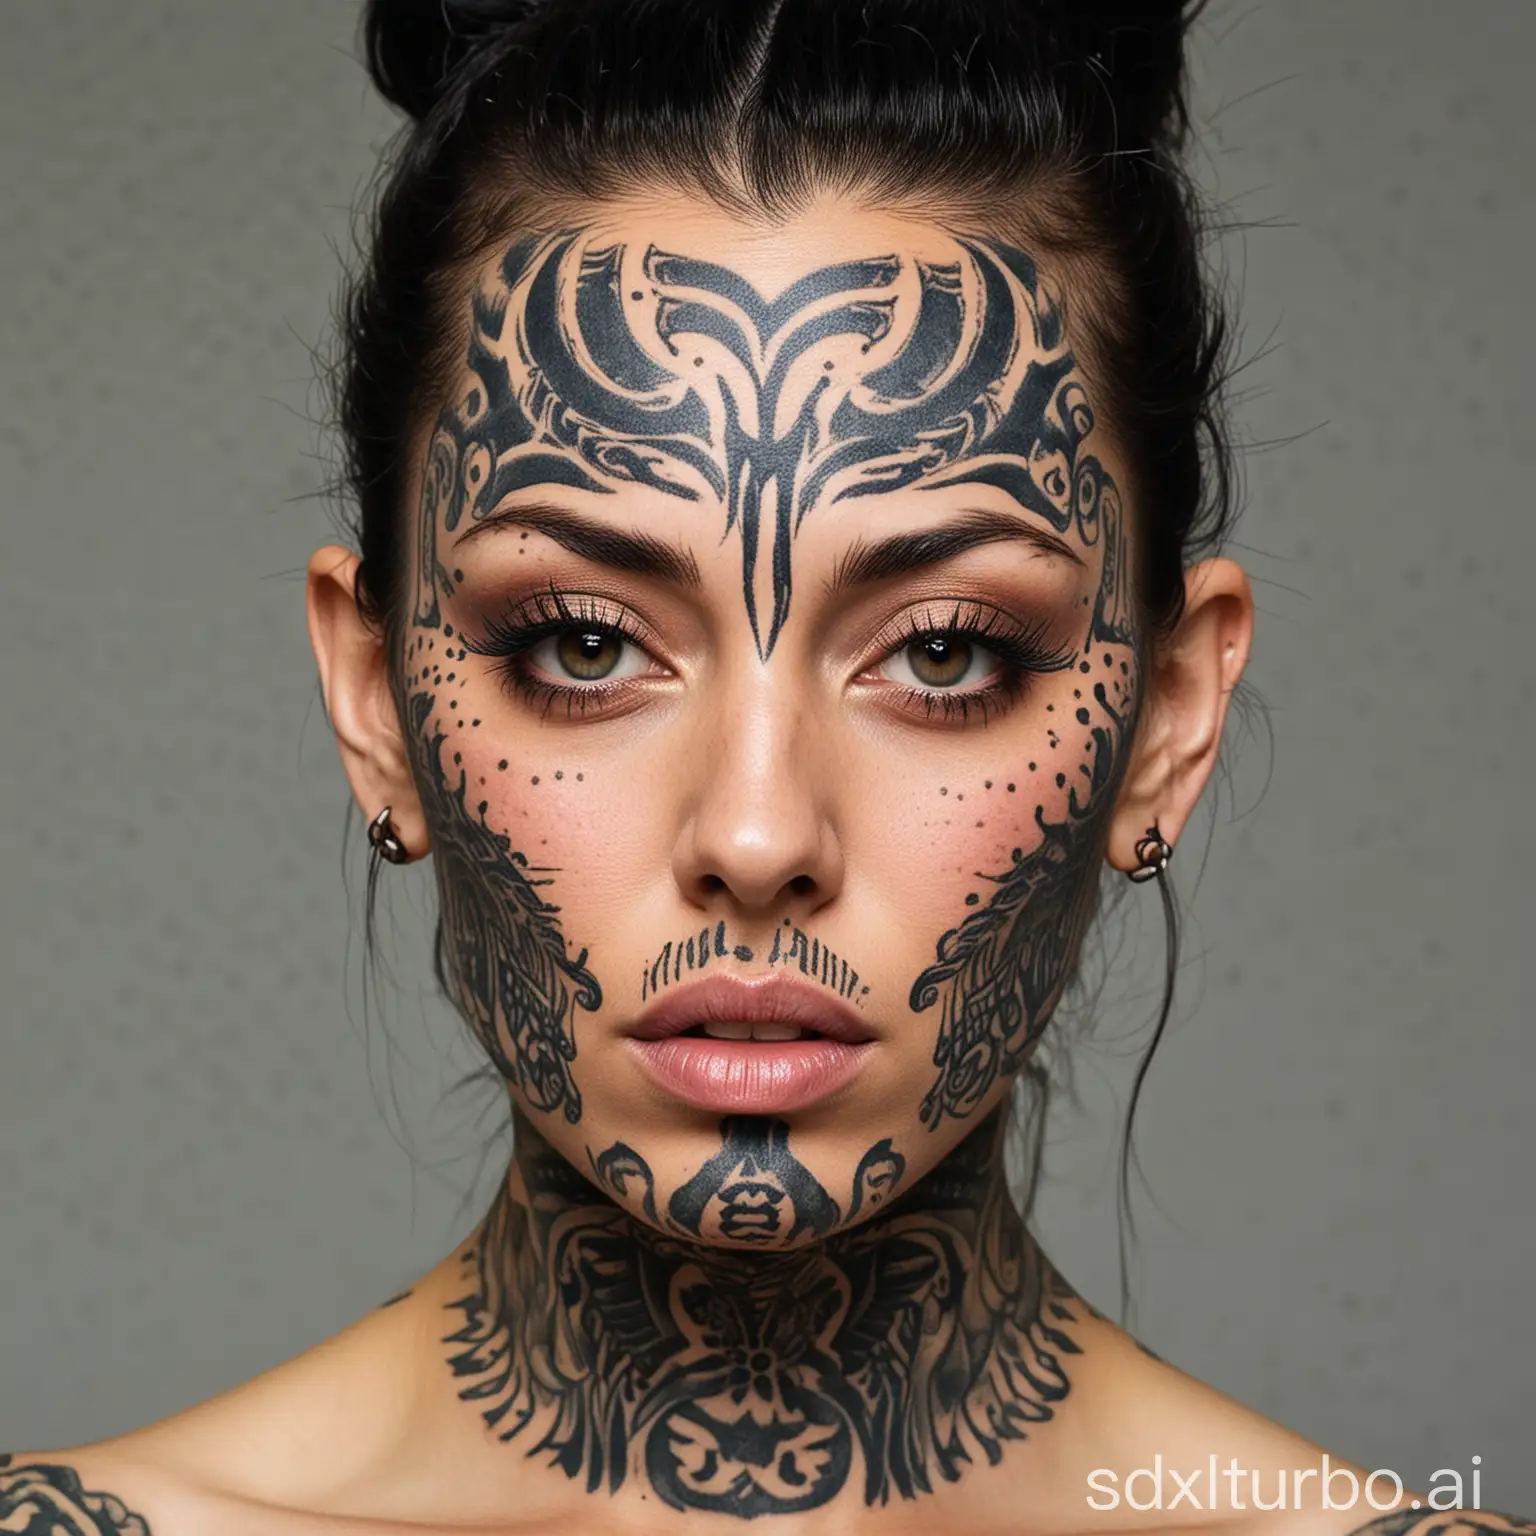 Portrait-of-a-Woman-with-Intricate-Face-Tattoos